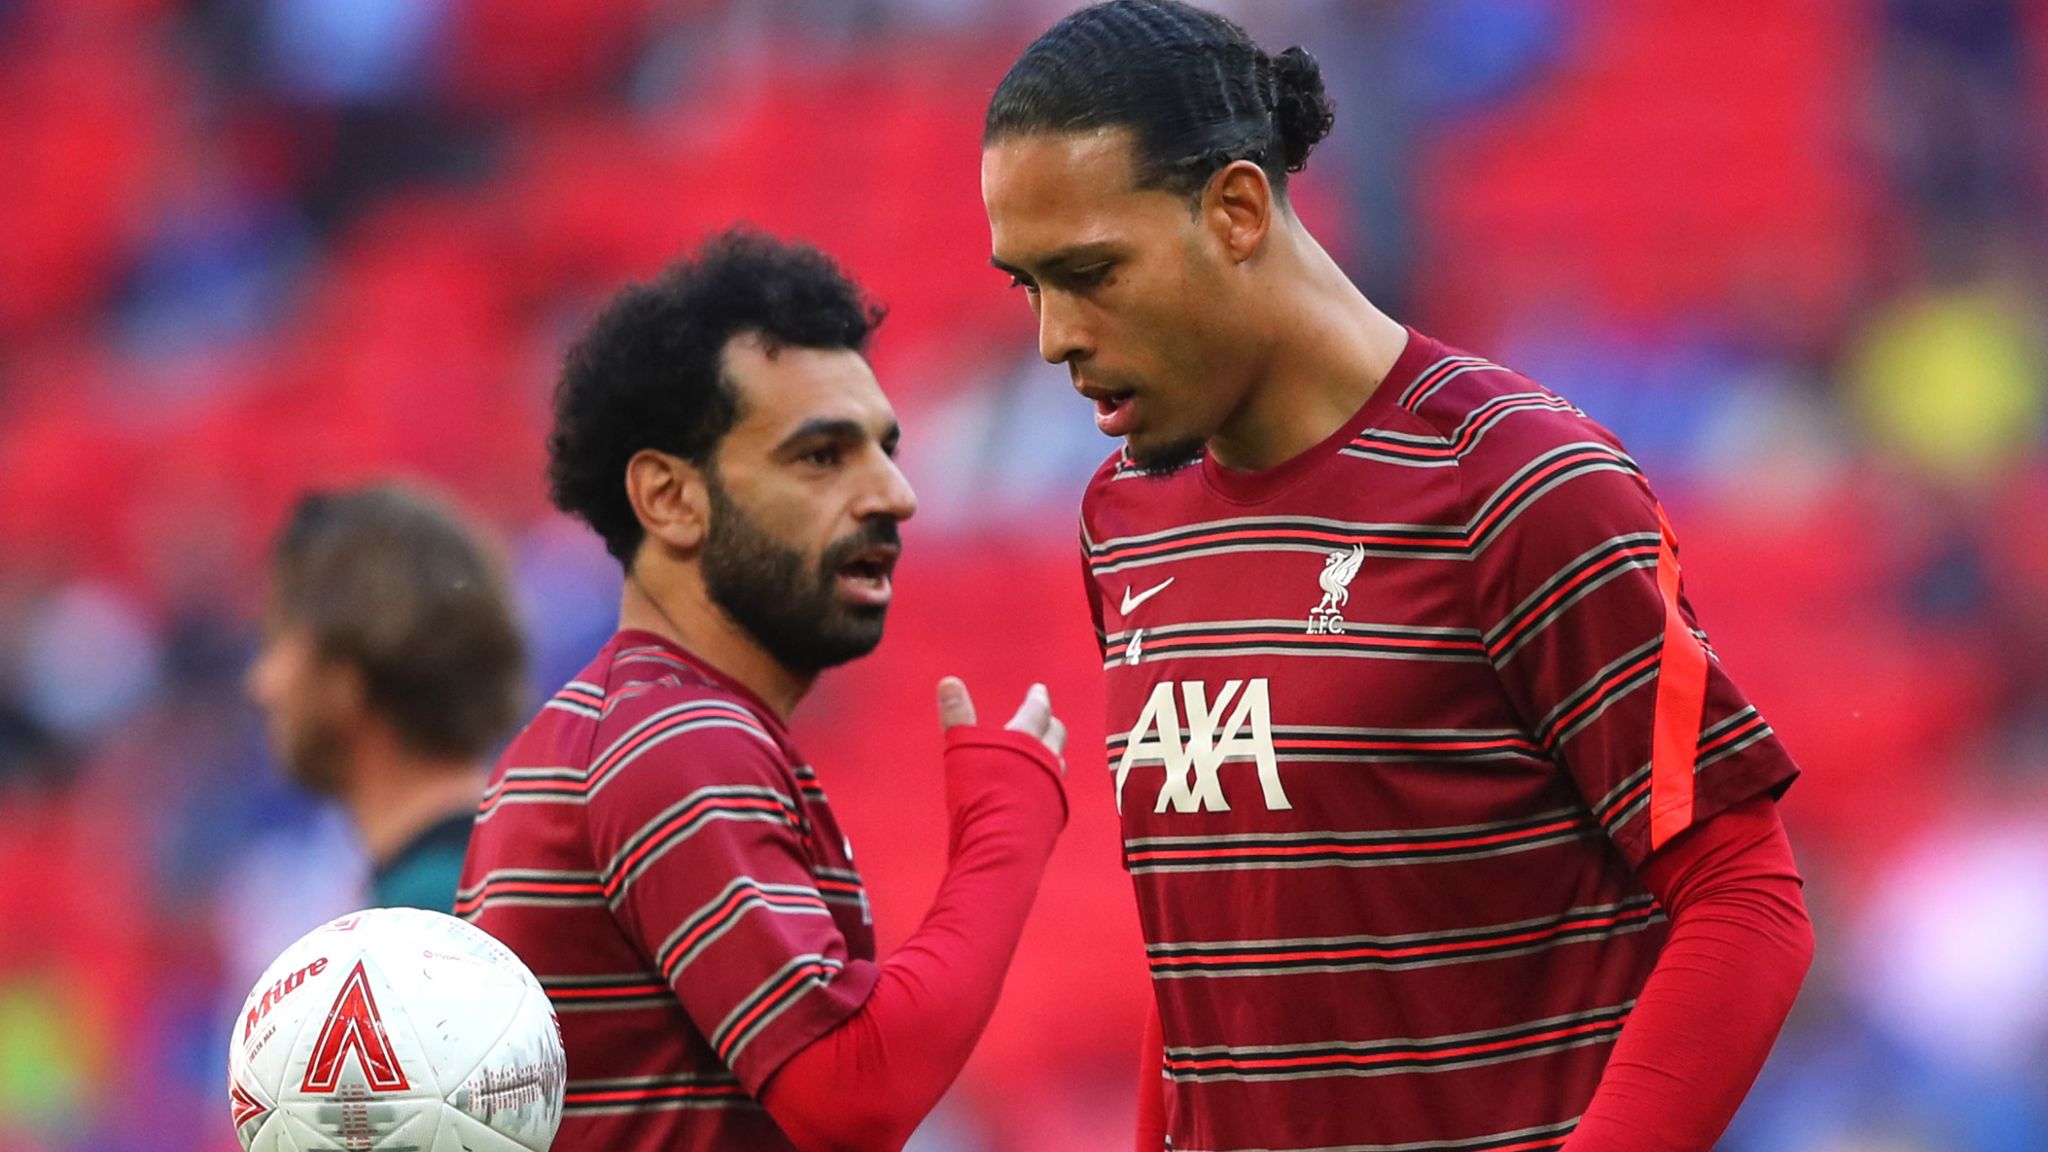 Liverpool would need Mohamed Salah and Virgil van Dijk back at their absolute best.